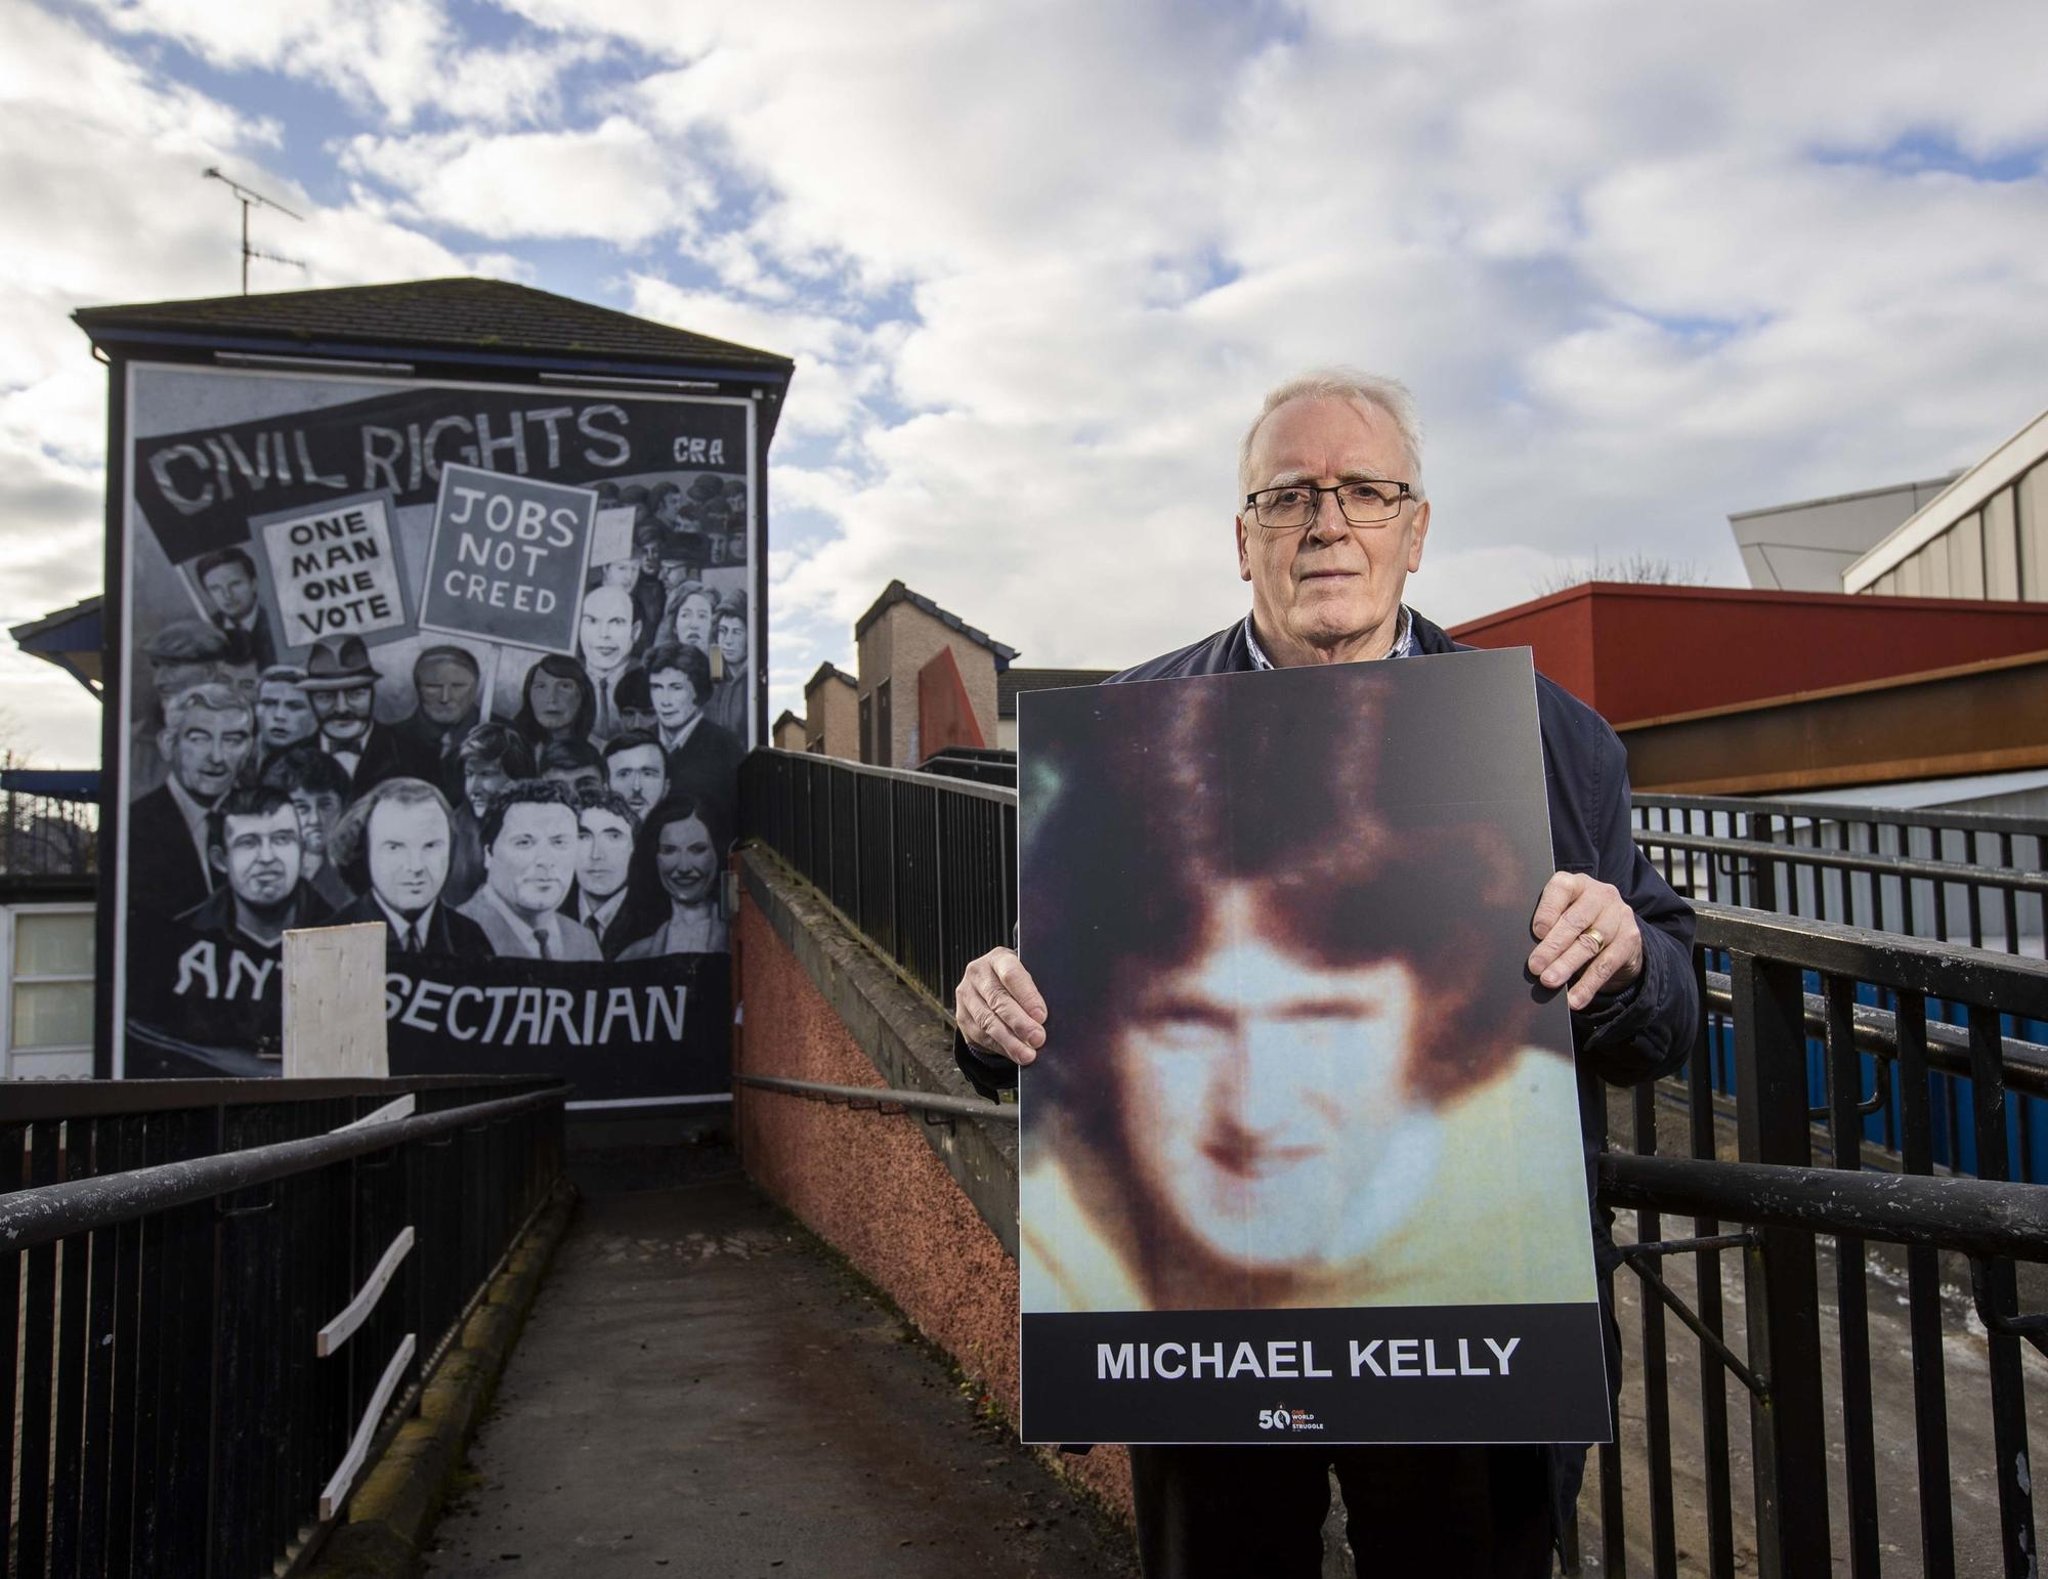 Bloody Sunday families say battle for justice goes on after 50 years | The Scotsman